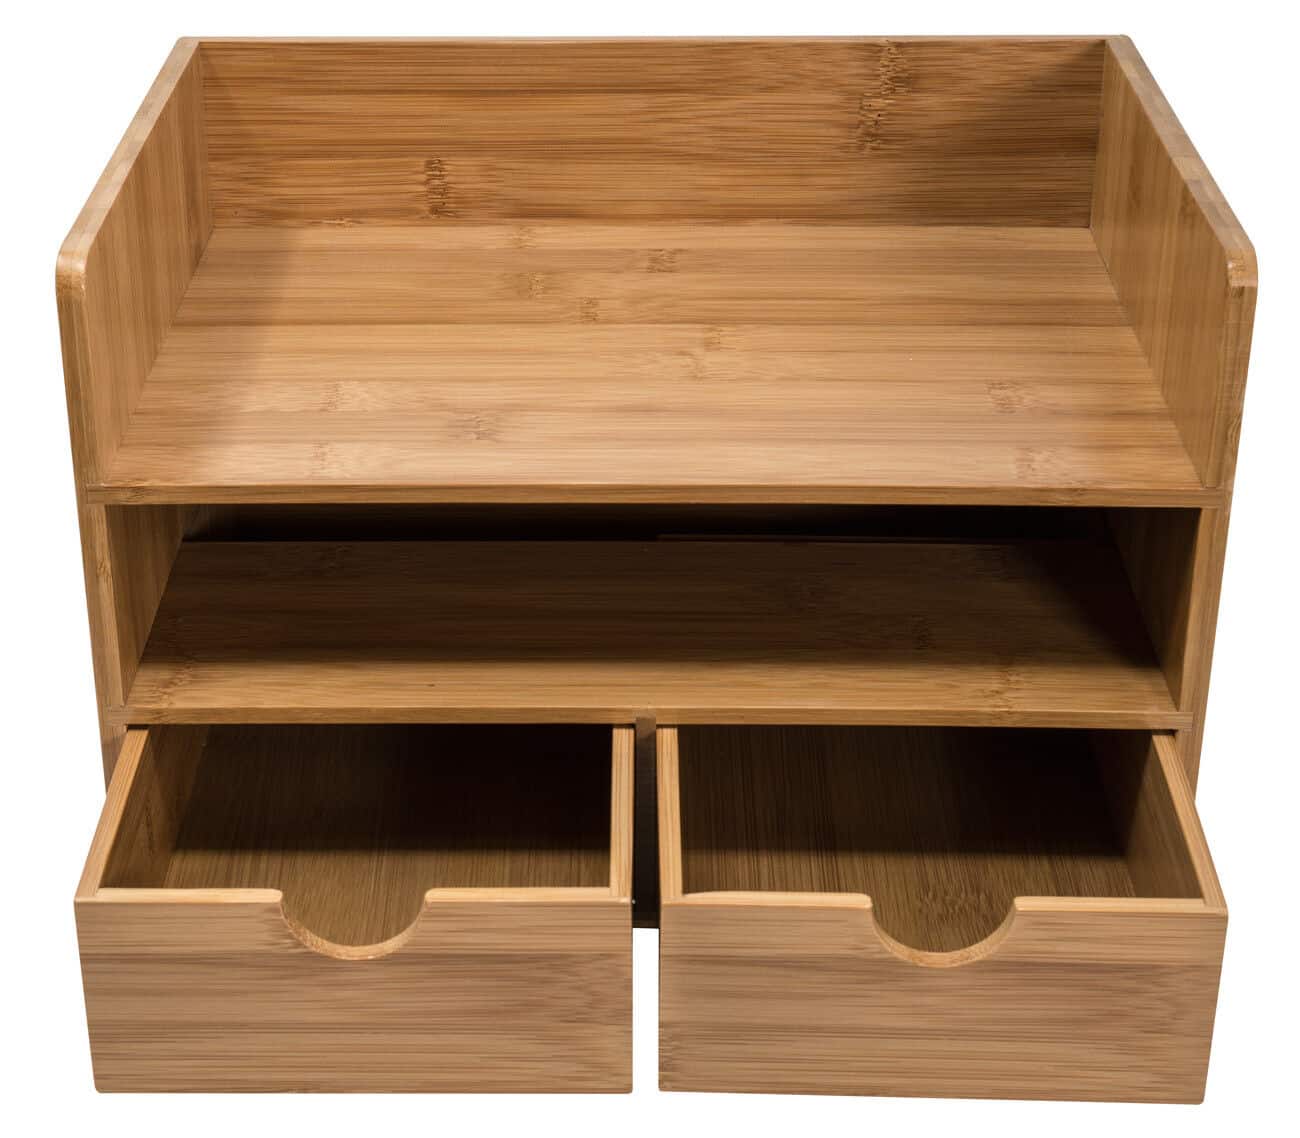 A wooden desk with two drawers and two drawers.